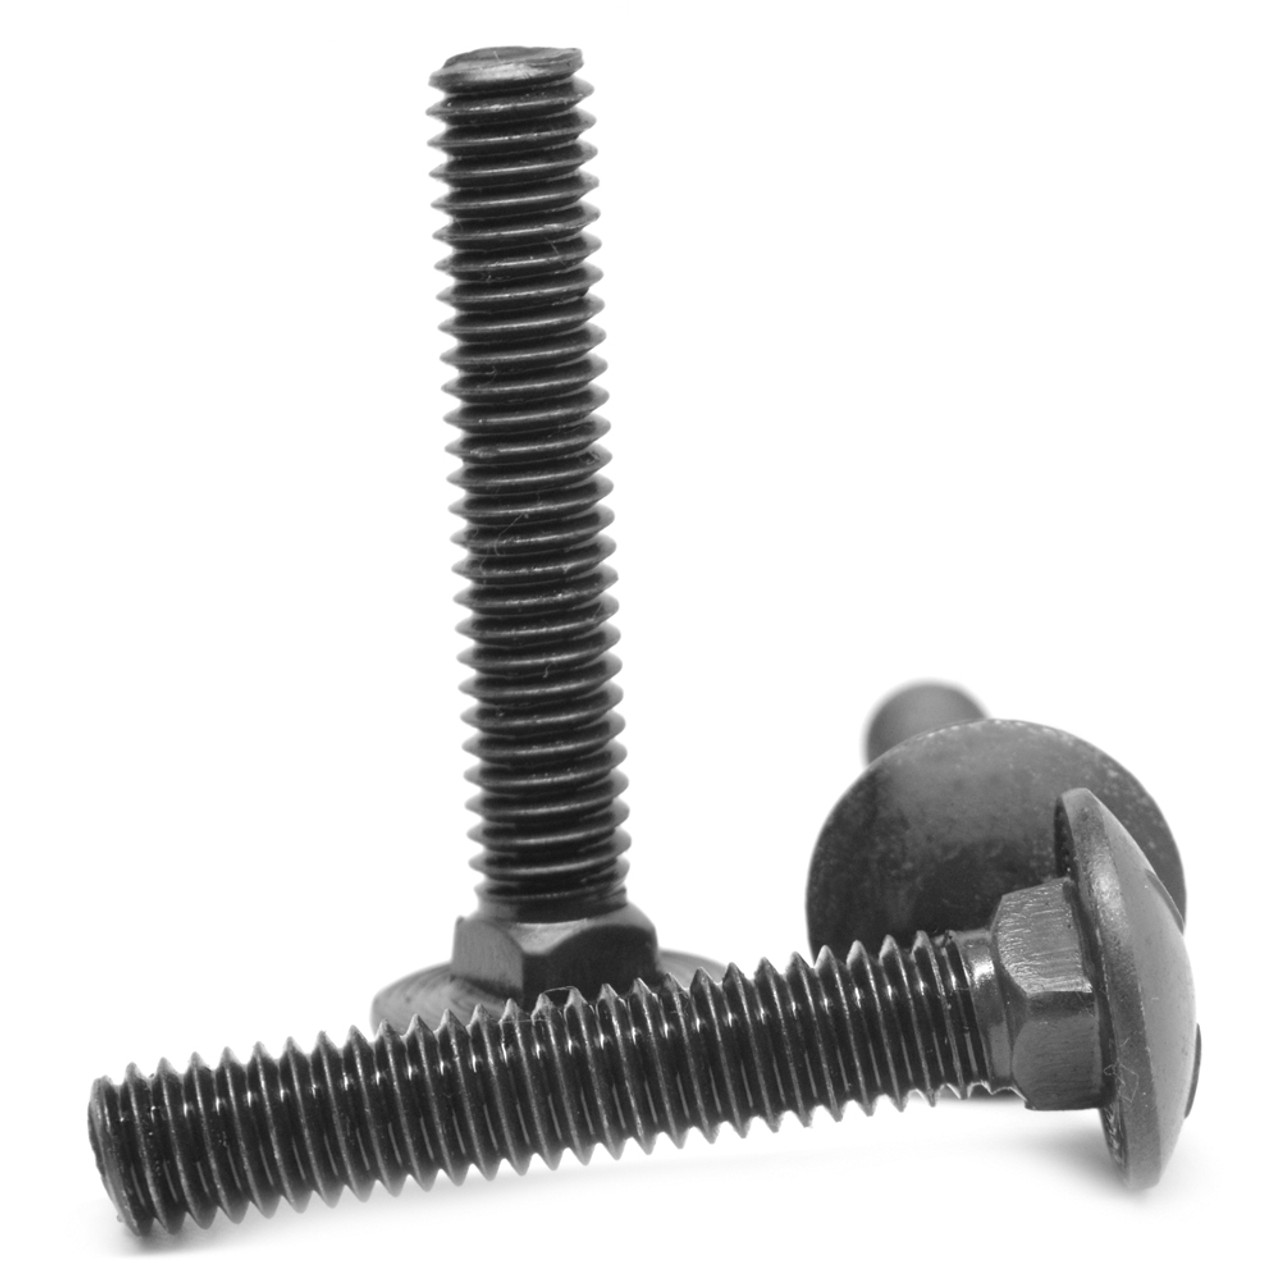 3/8-16 x 1 Coarse Thread Carriage Bolt Low Carbon Steel Black Oxide